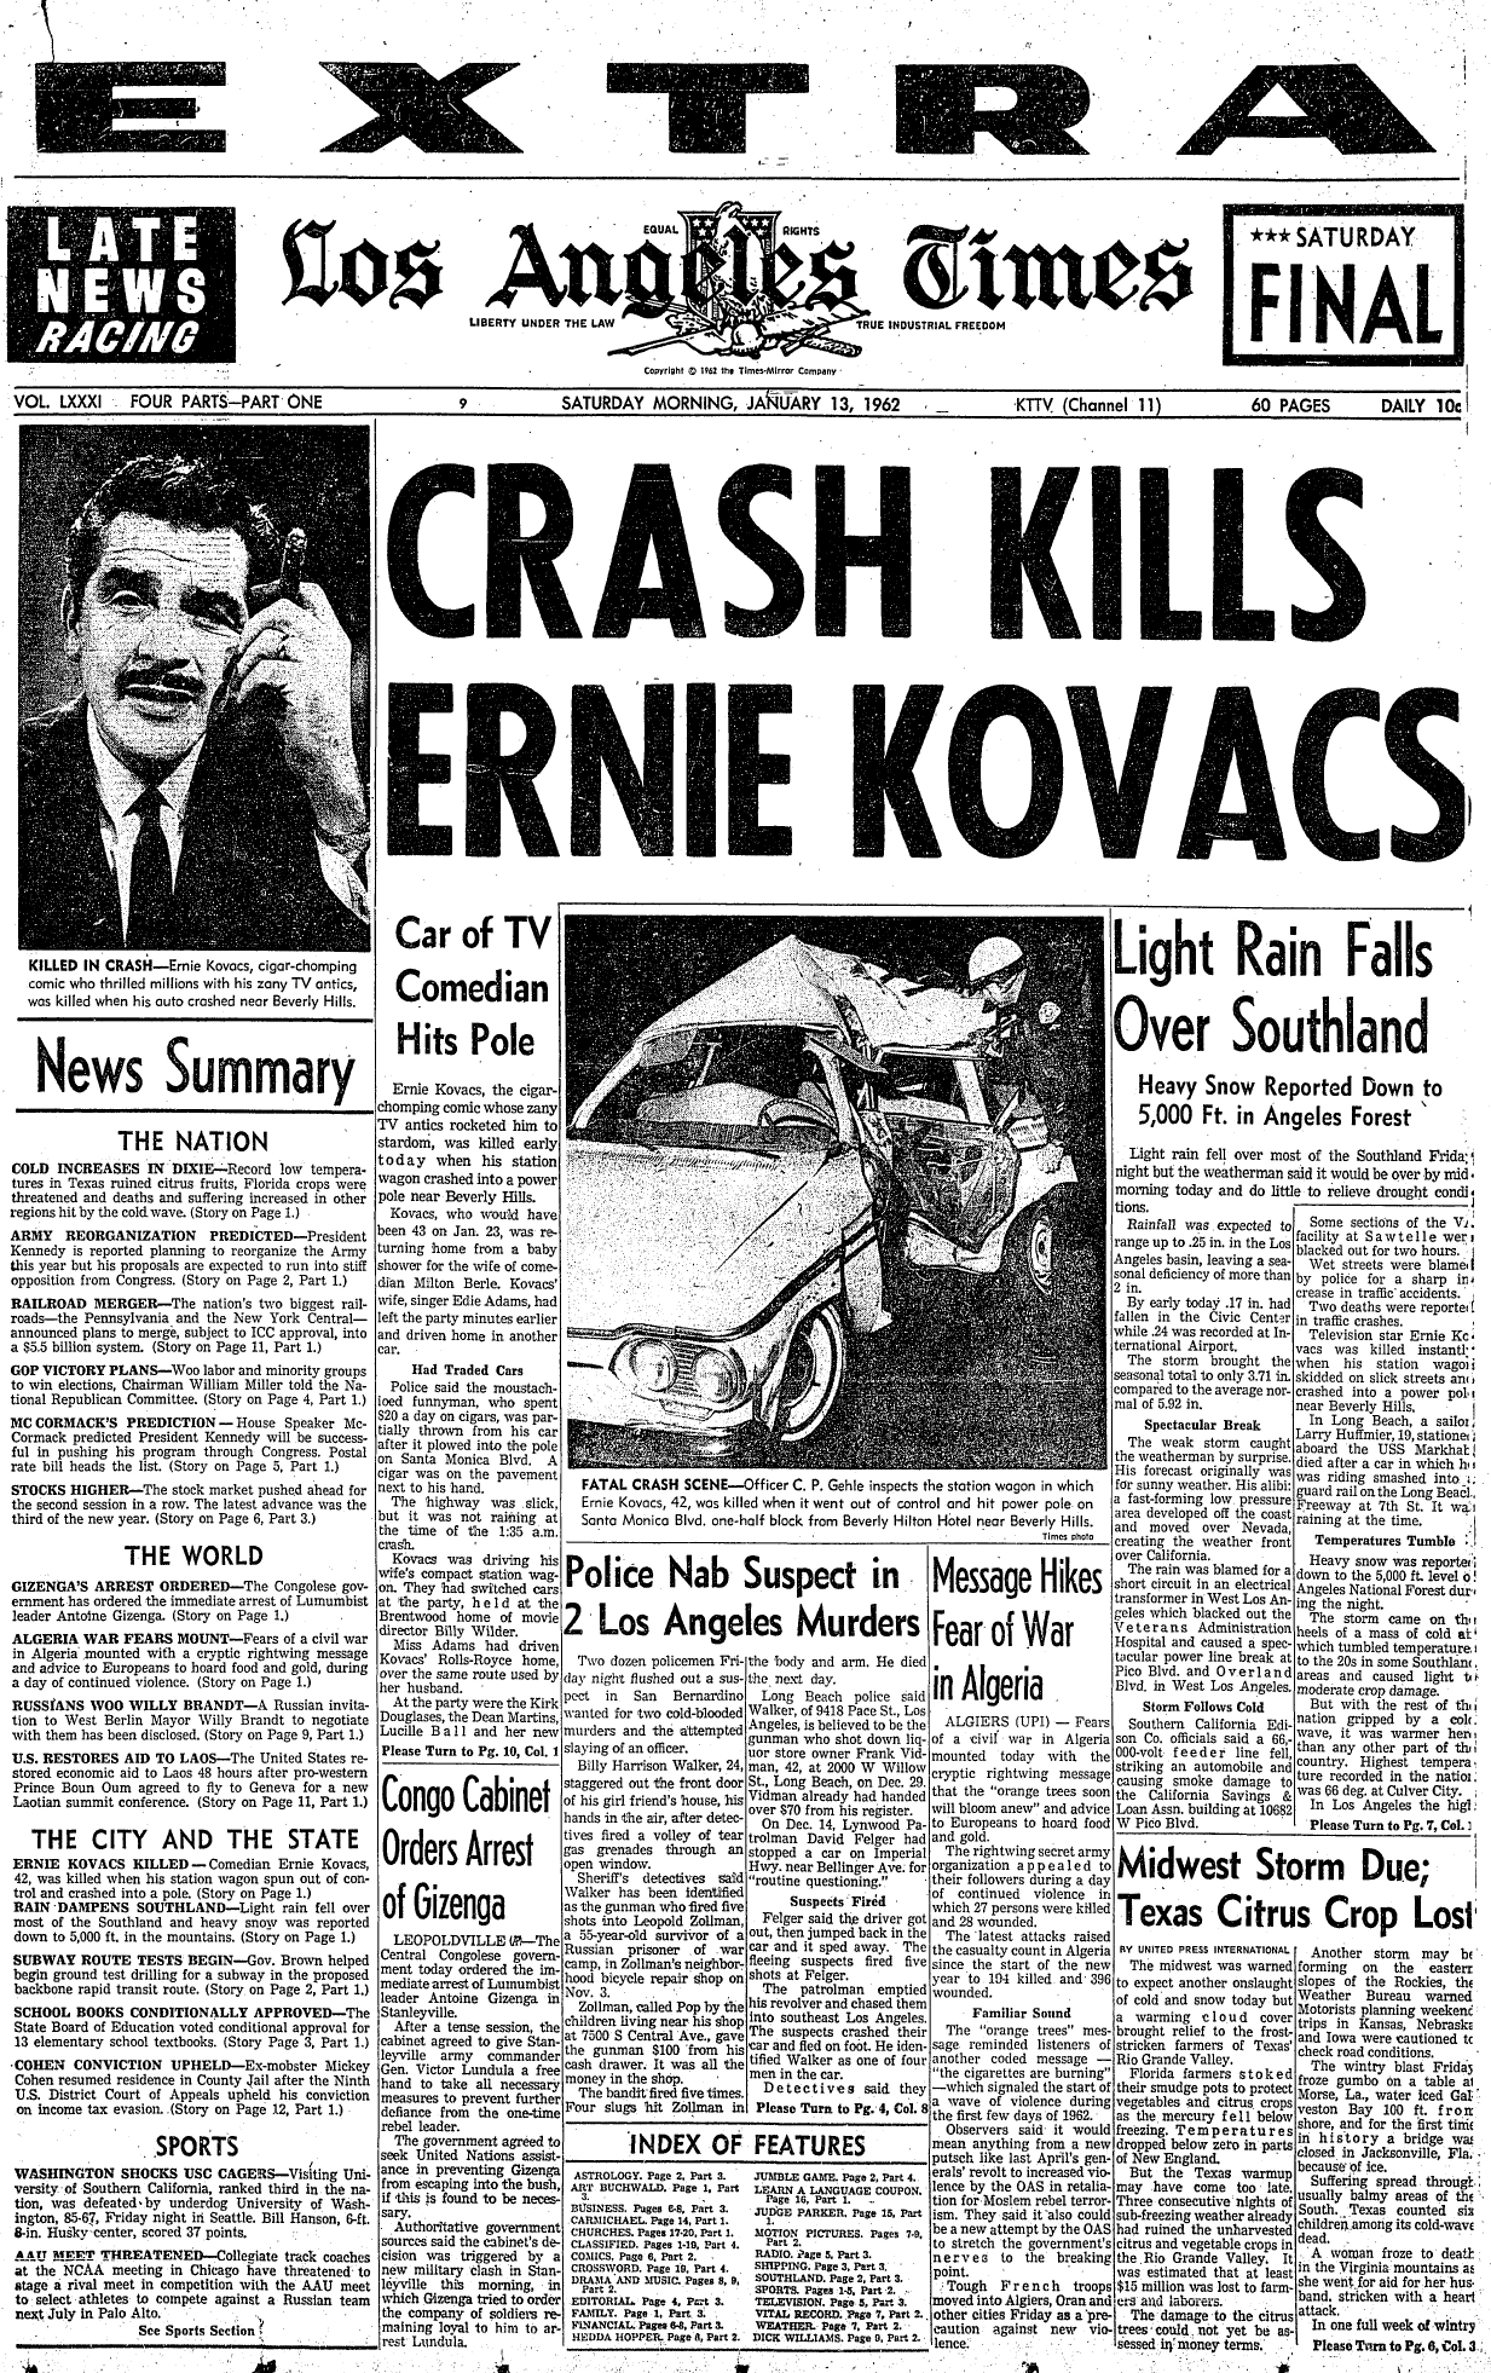 50th Anniversary Of the Death Of Ernie Kovacs